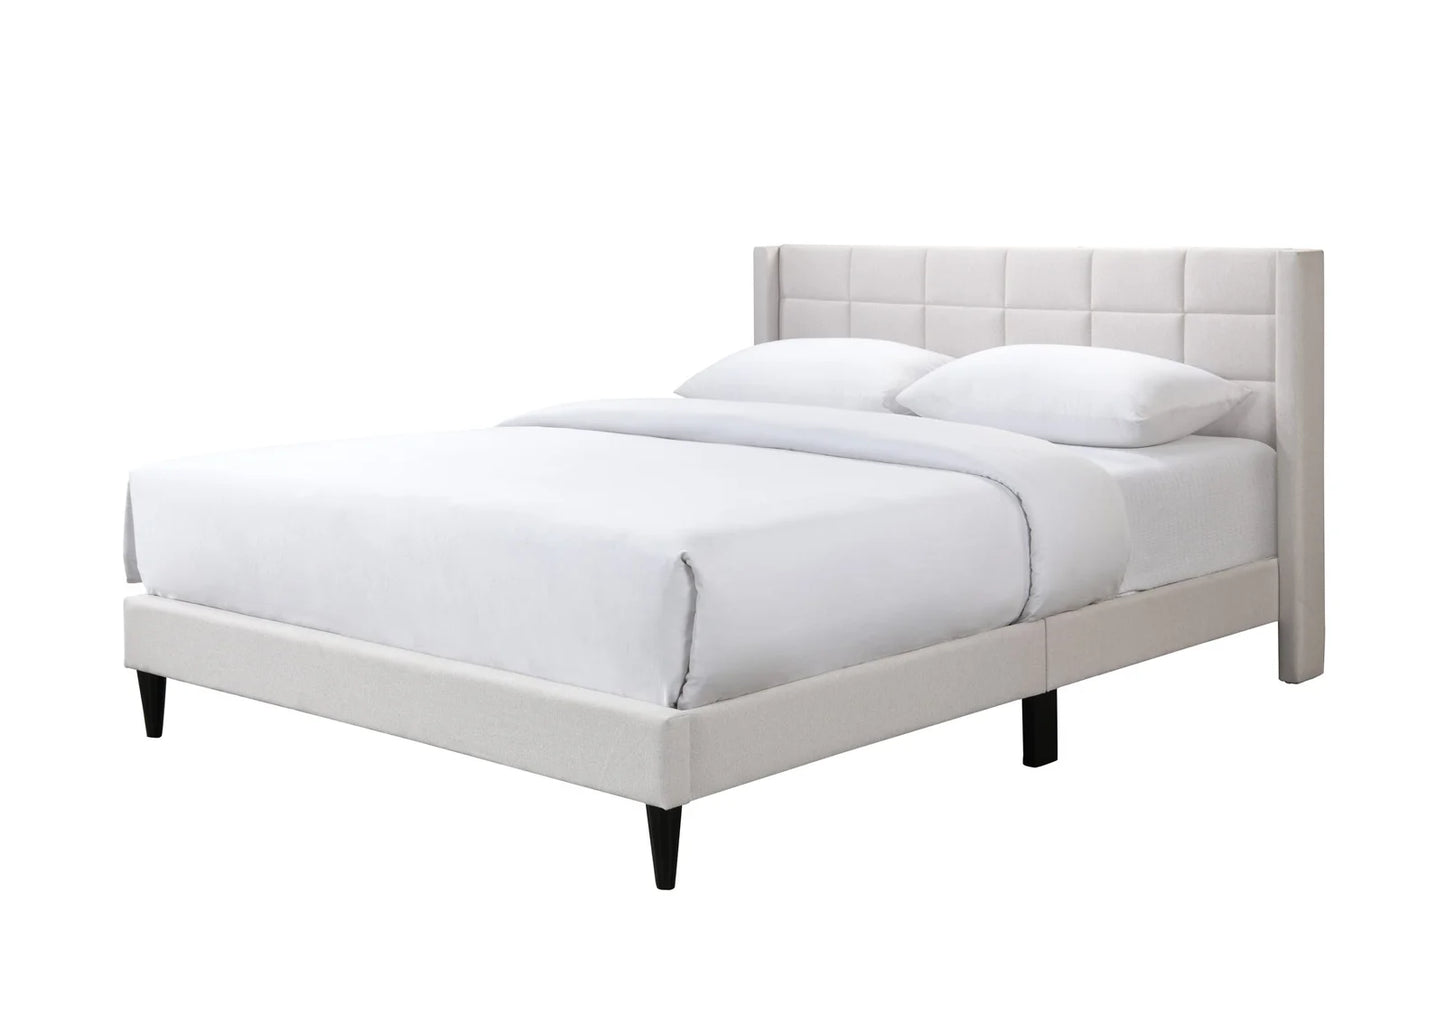 Sylvia Bed Frame - Double Size